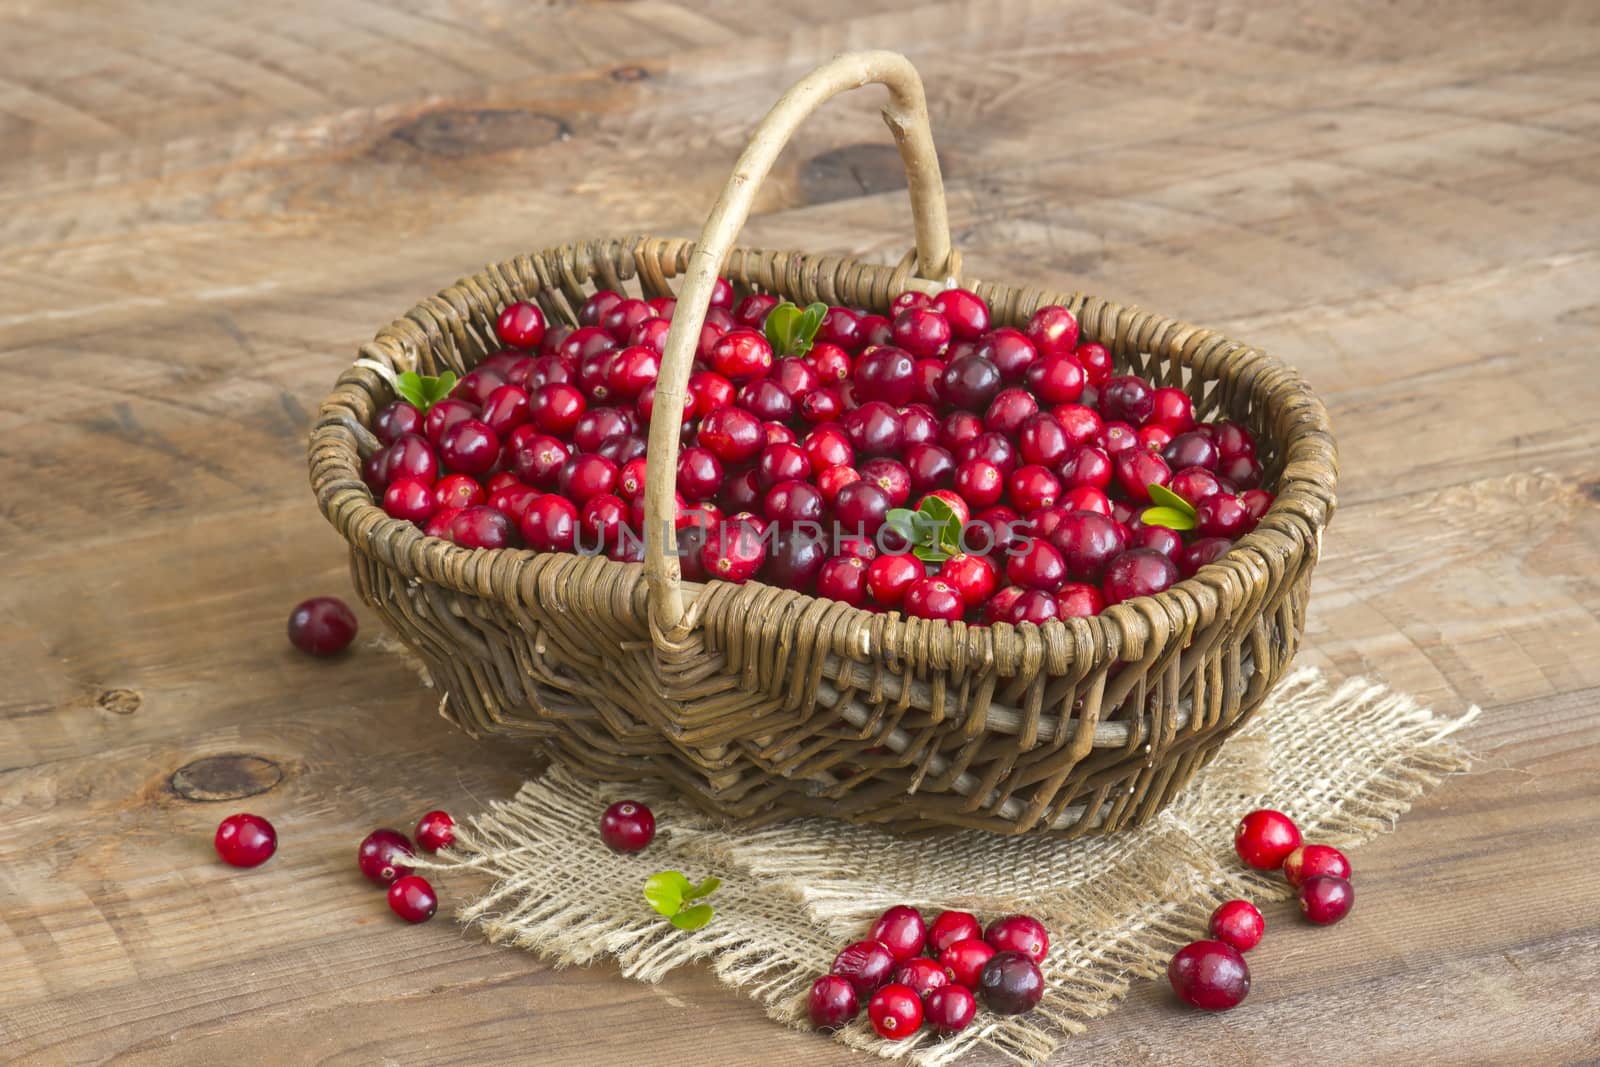 Cranberries in a basket on wooden background by miradrozdowski